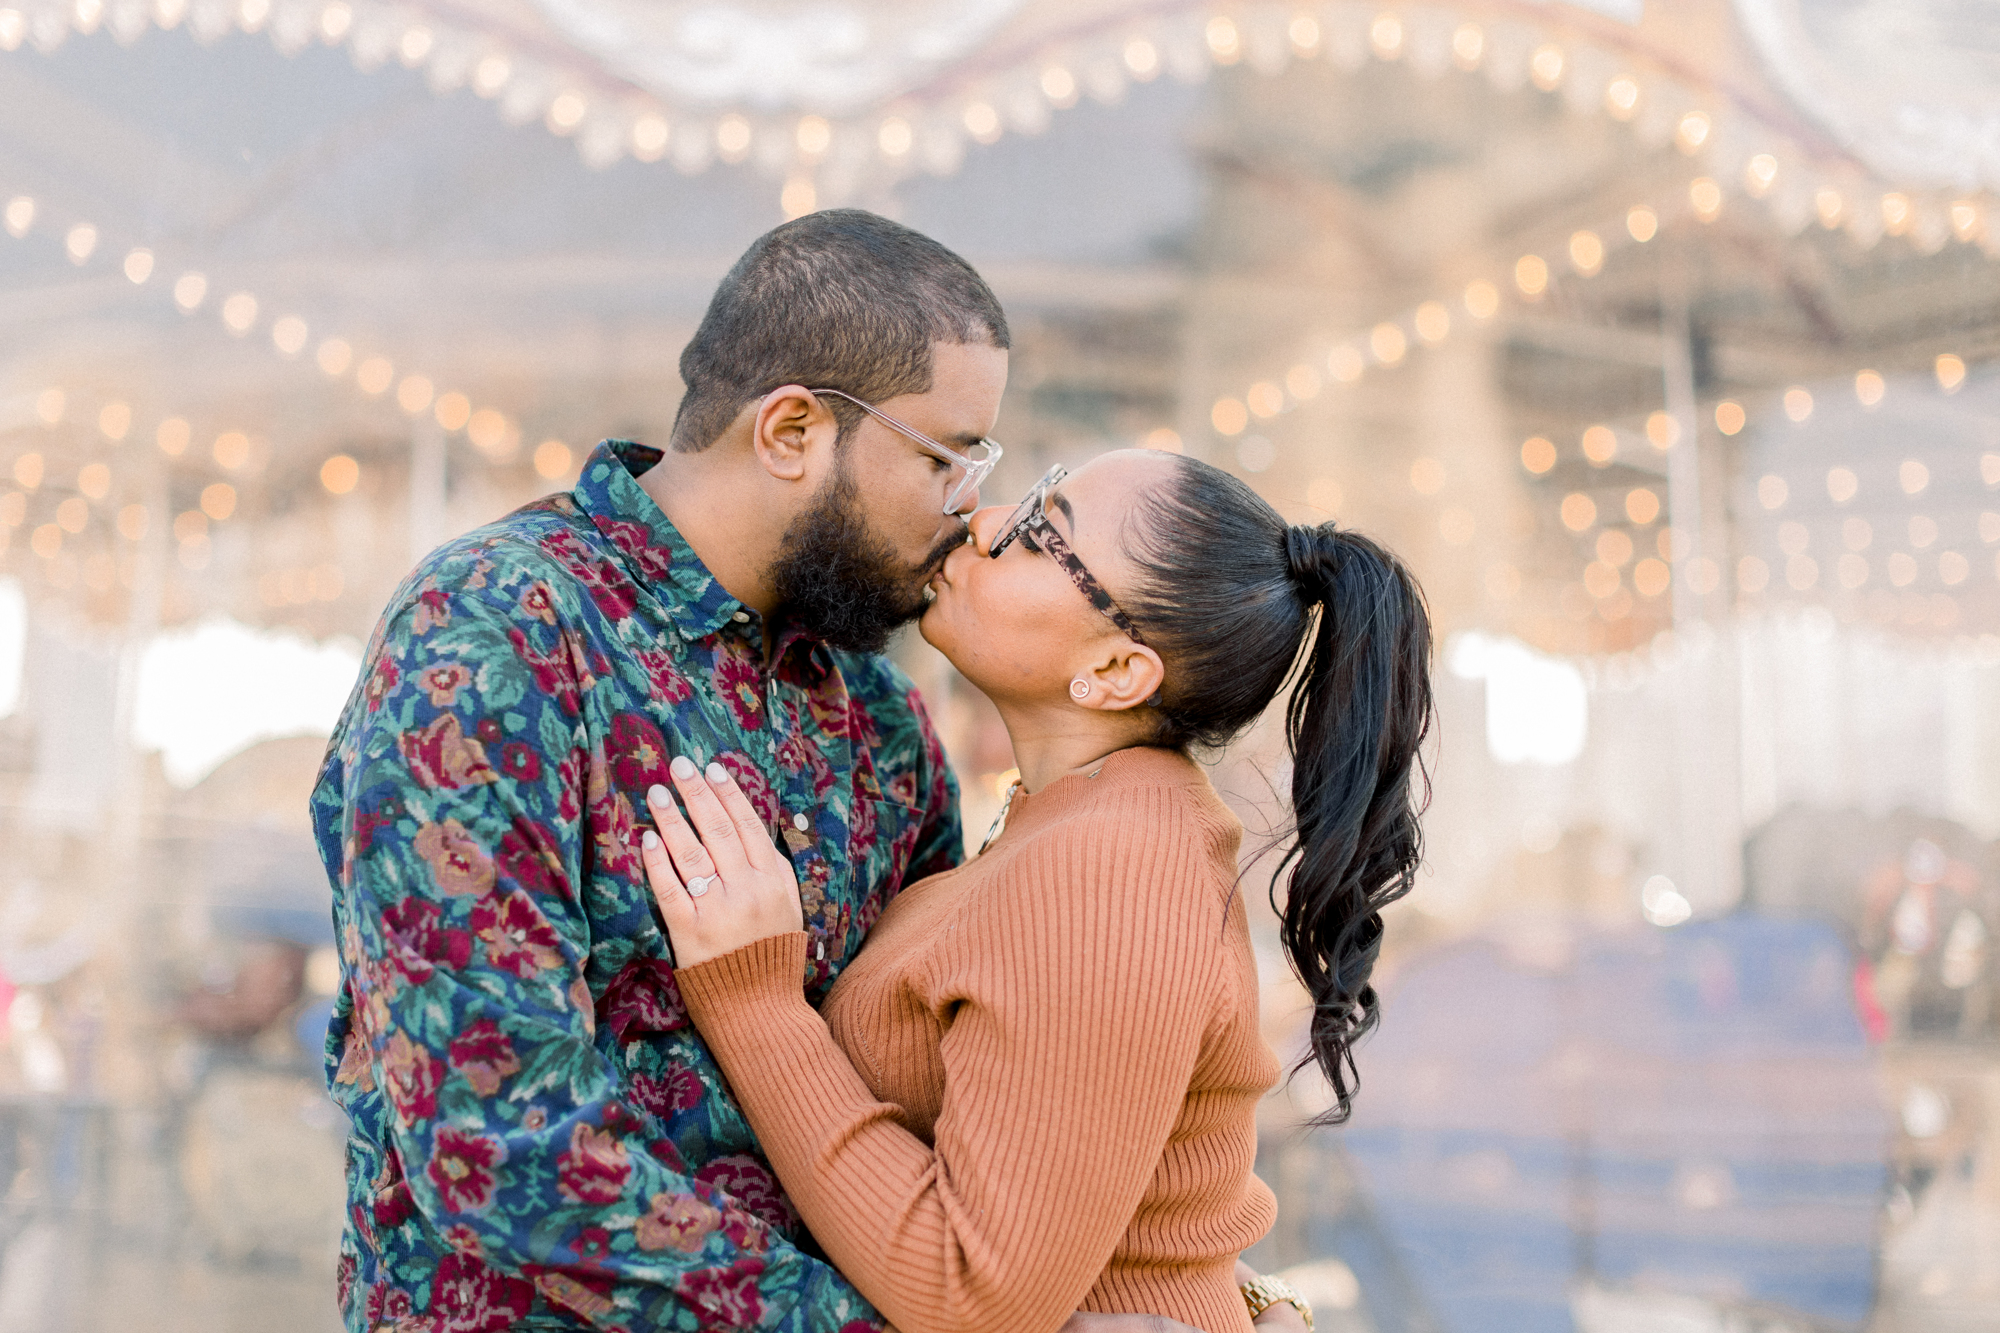 Lovely Autumn DUMBO Engagement Photography at the Brooklyn Bridge